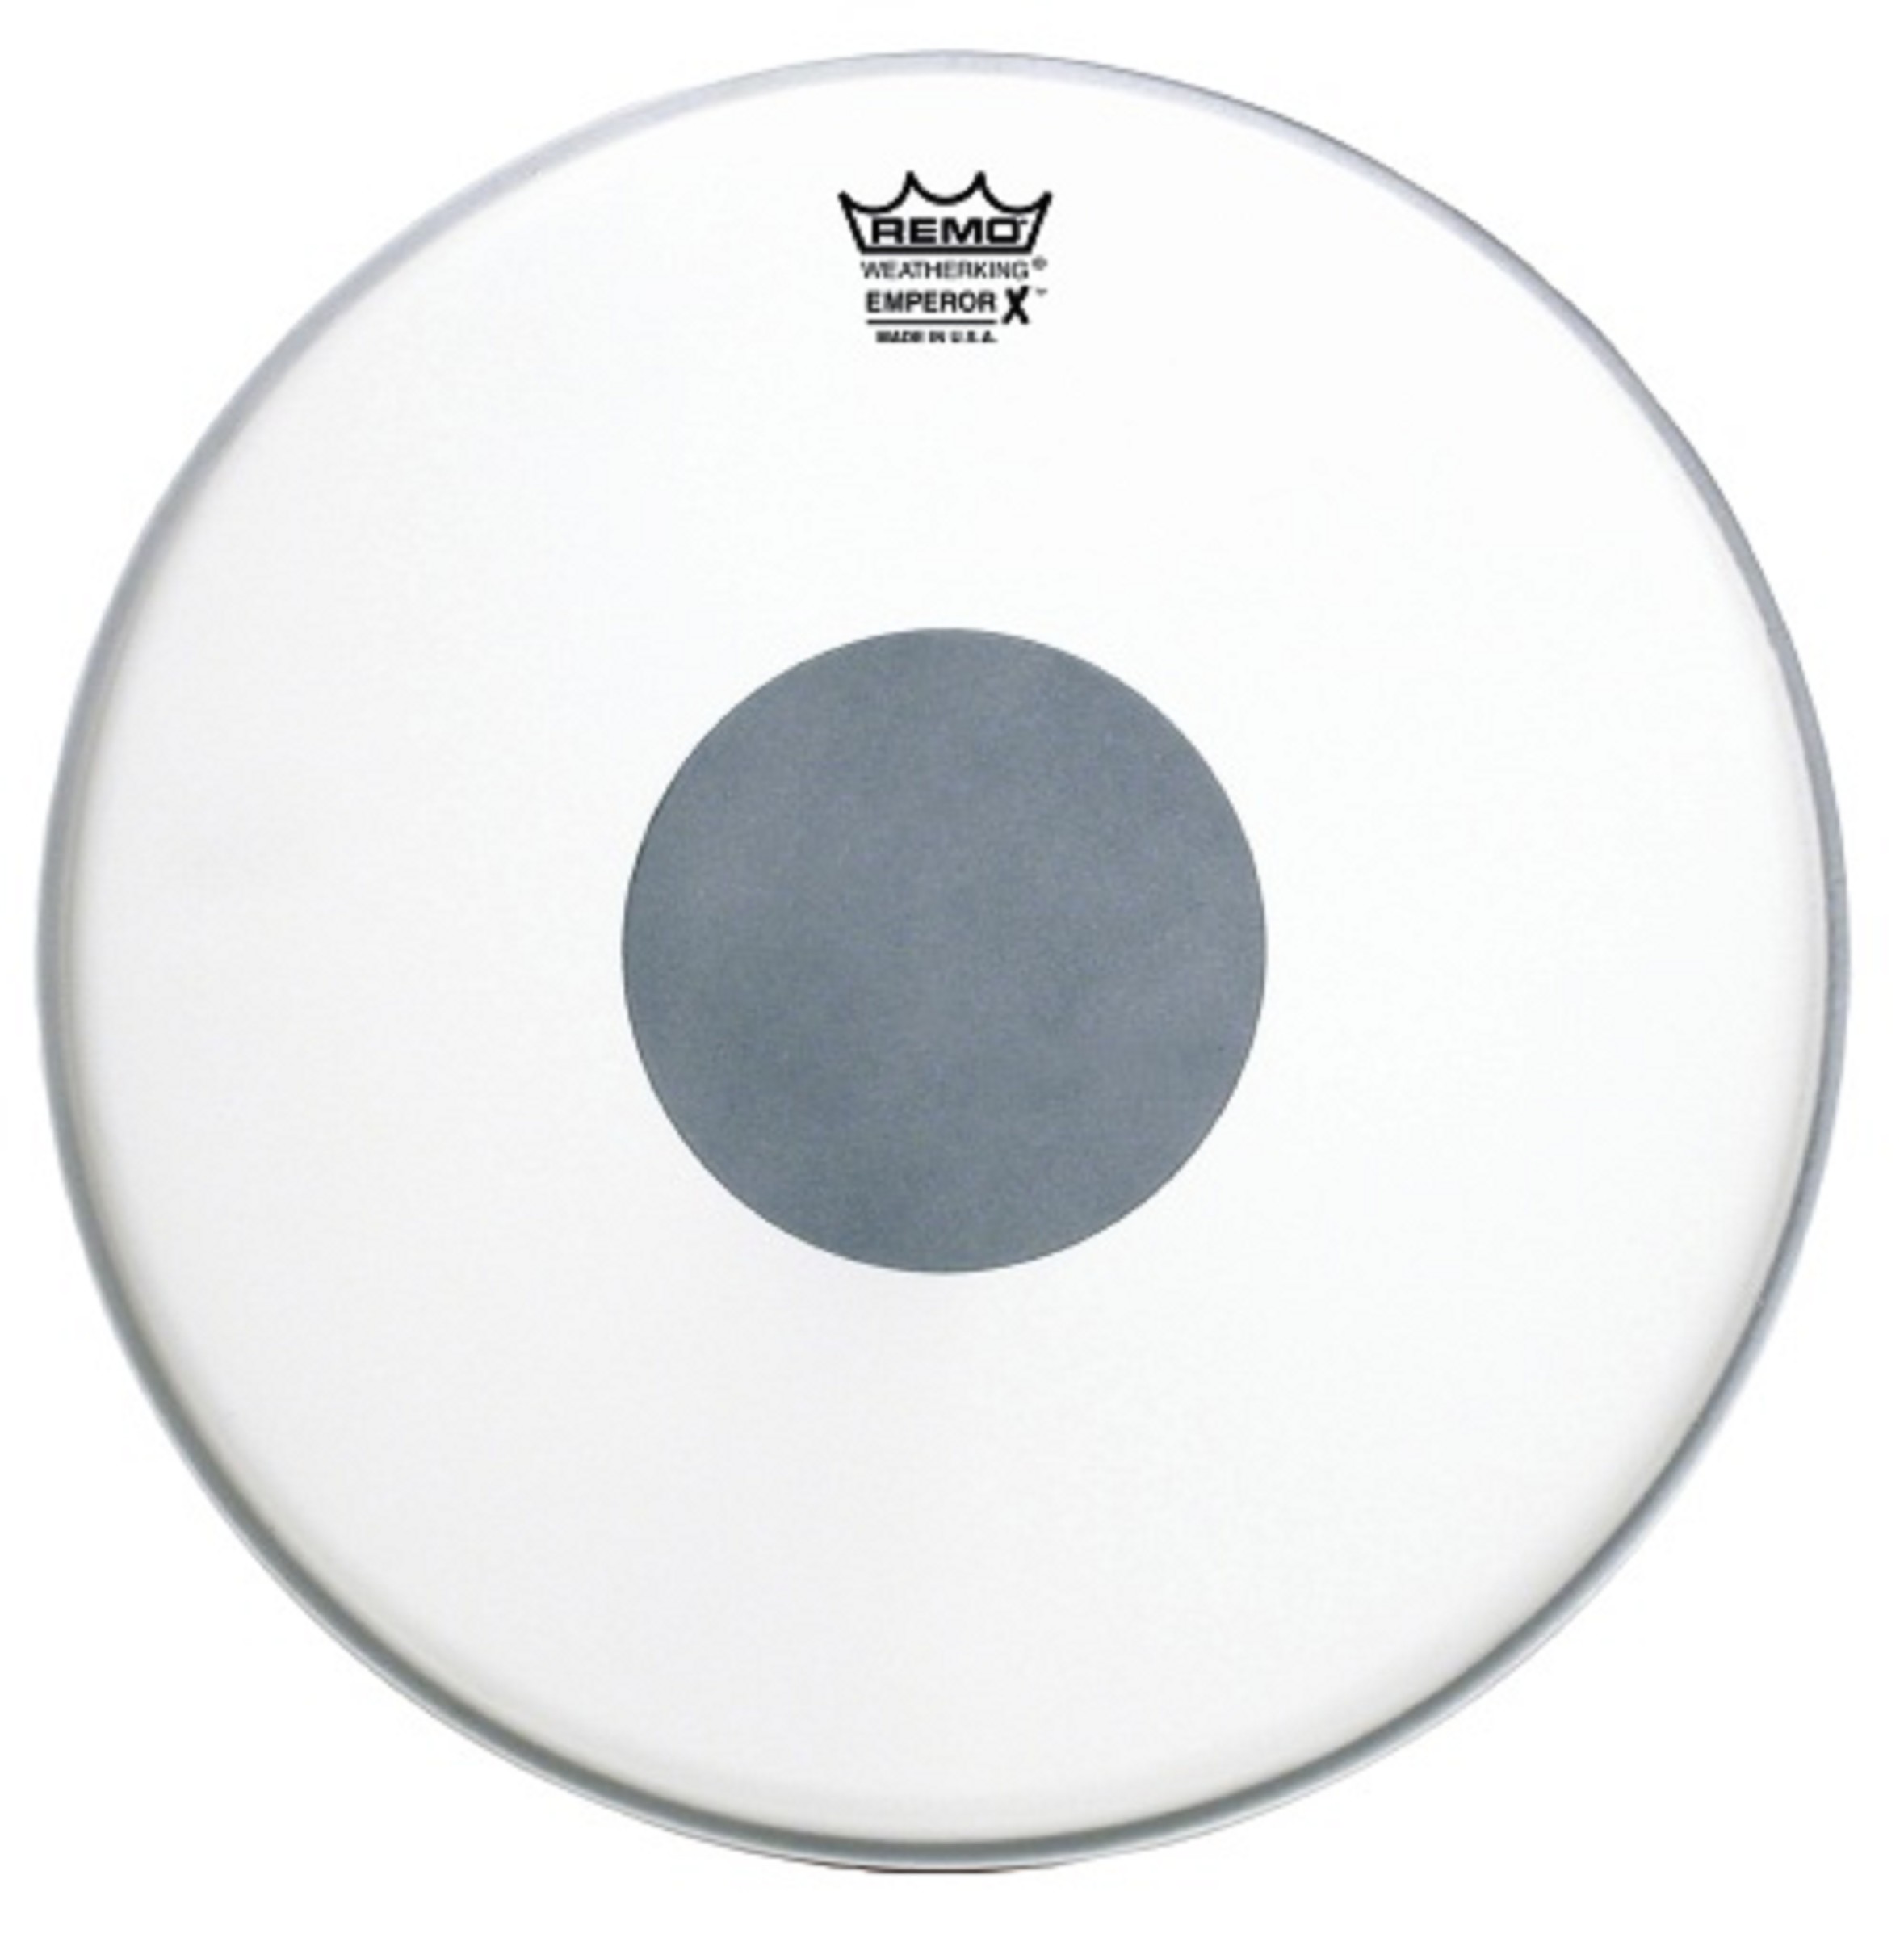 Remo Fell Emperor X 13" Coated mit Dot